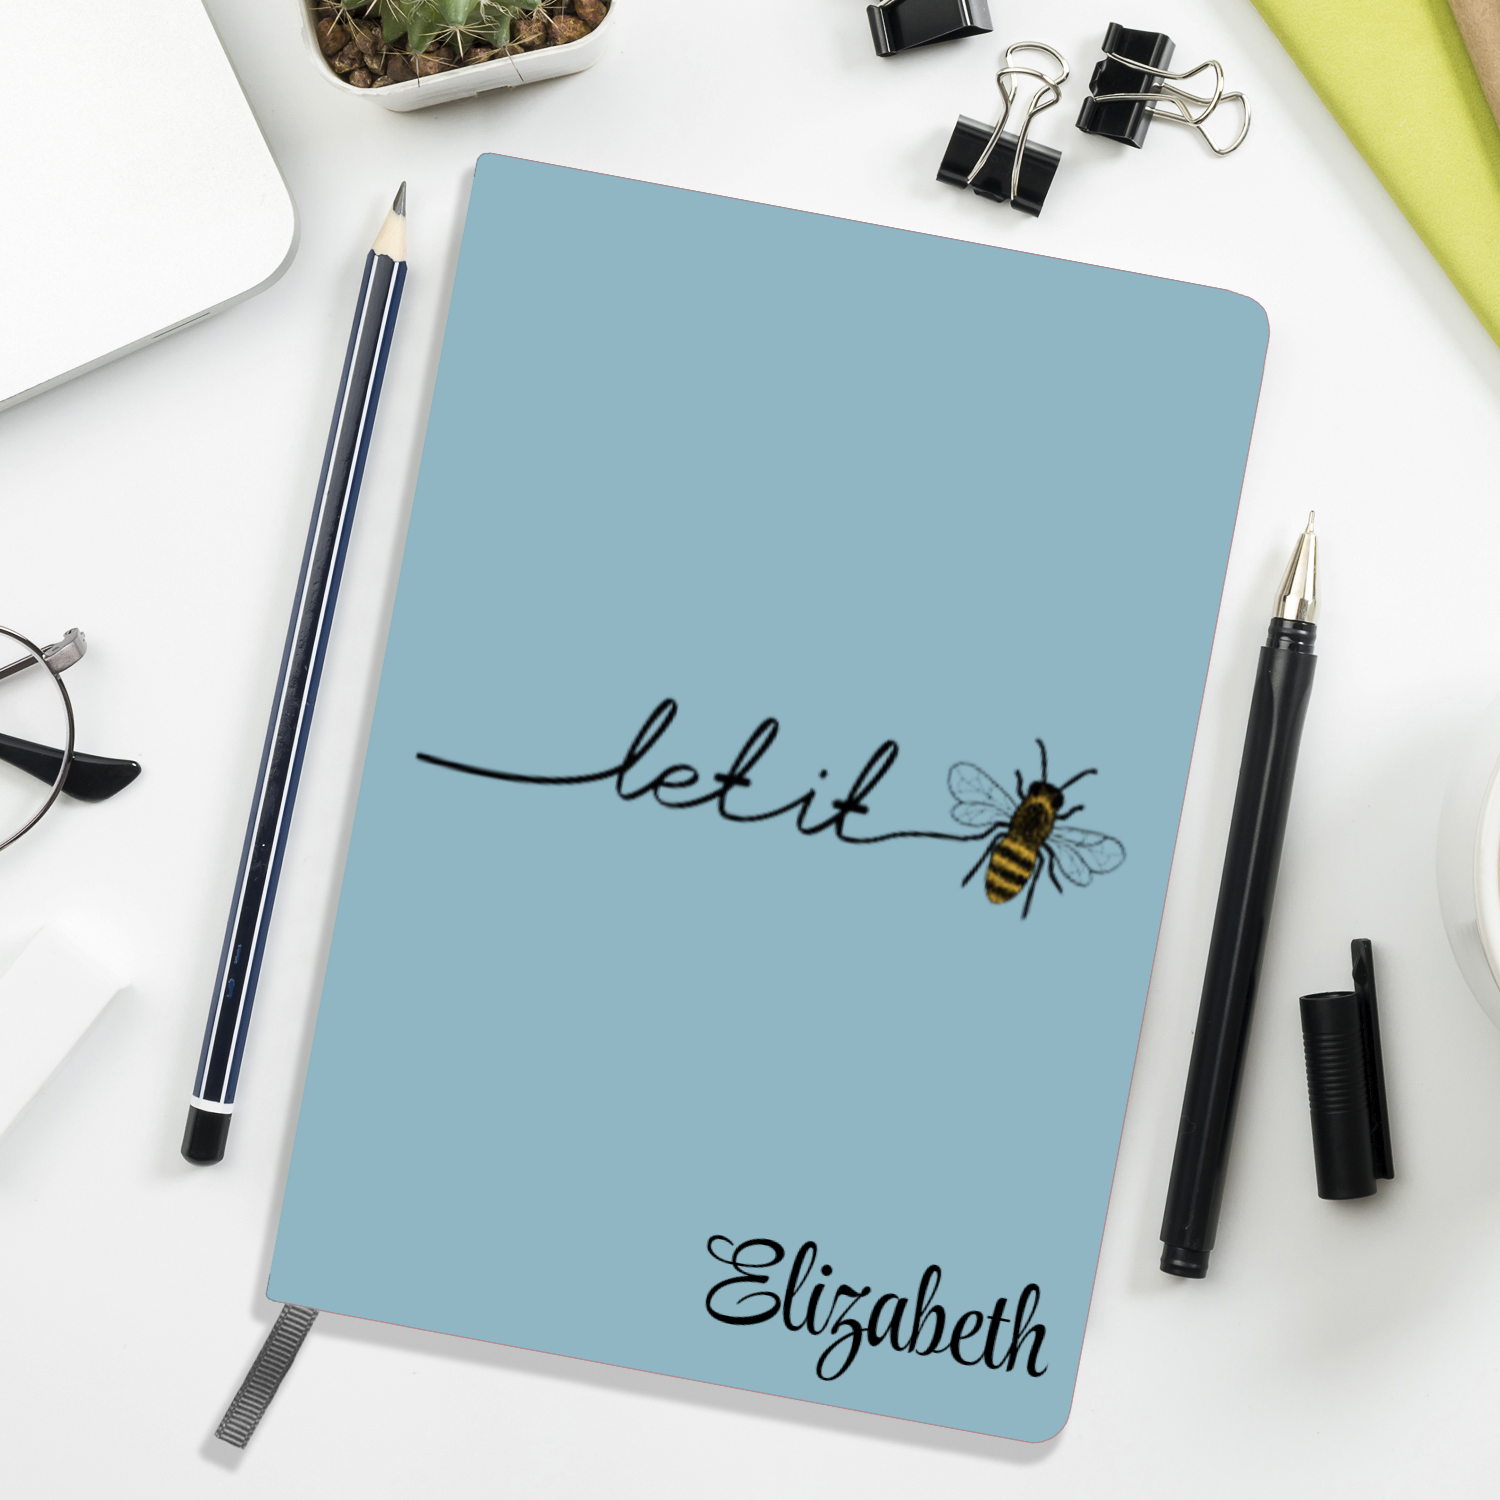 Personalized Notebook/Journals - Personalized Note Book: Let It be 